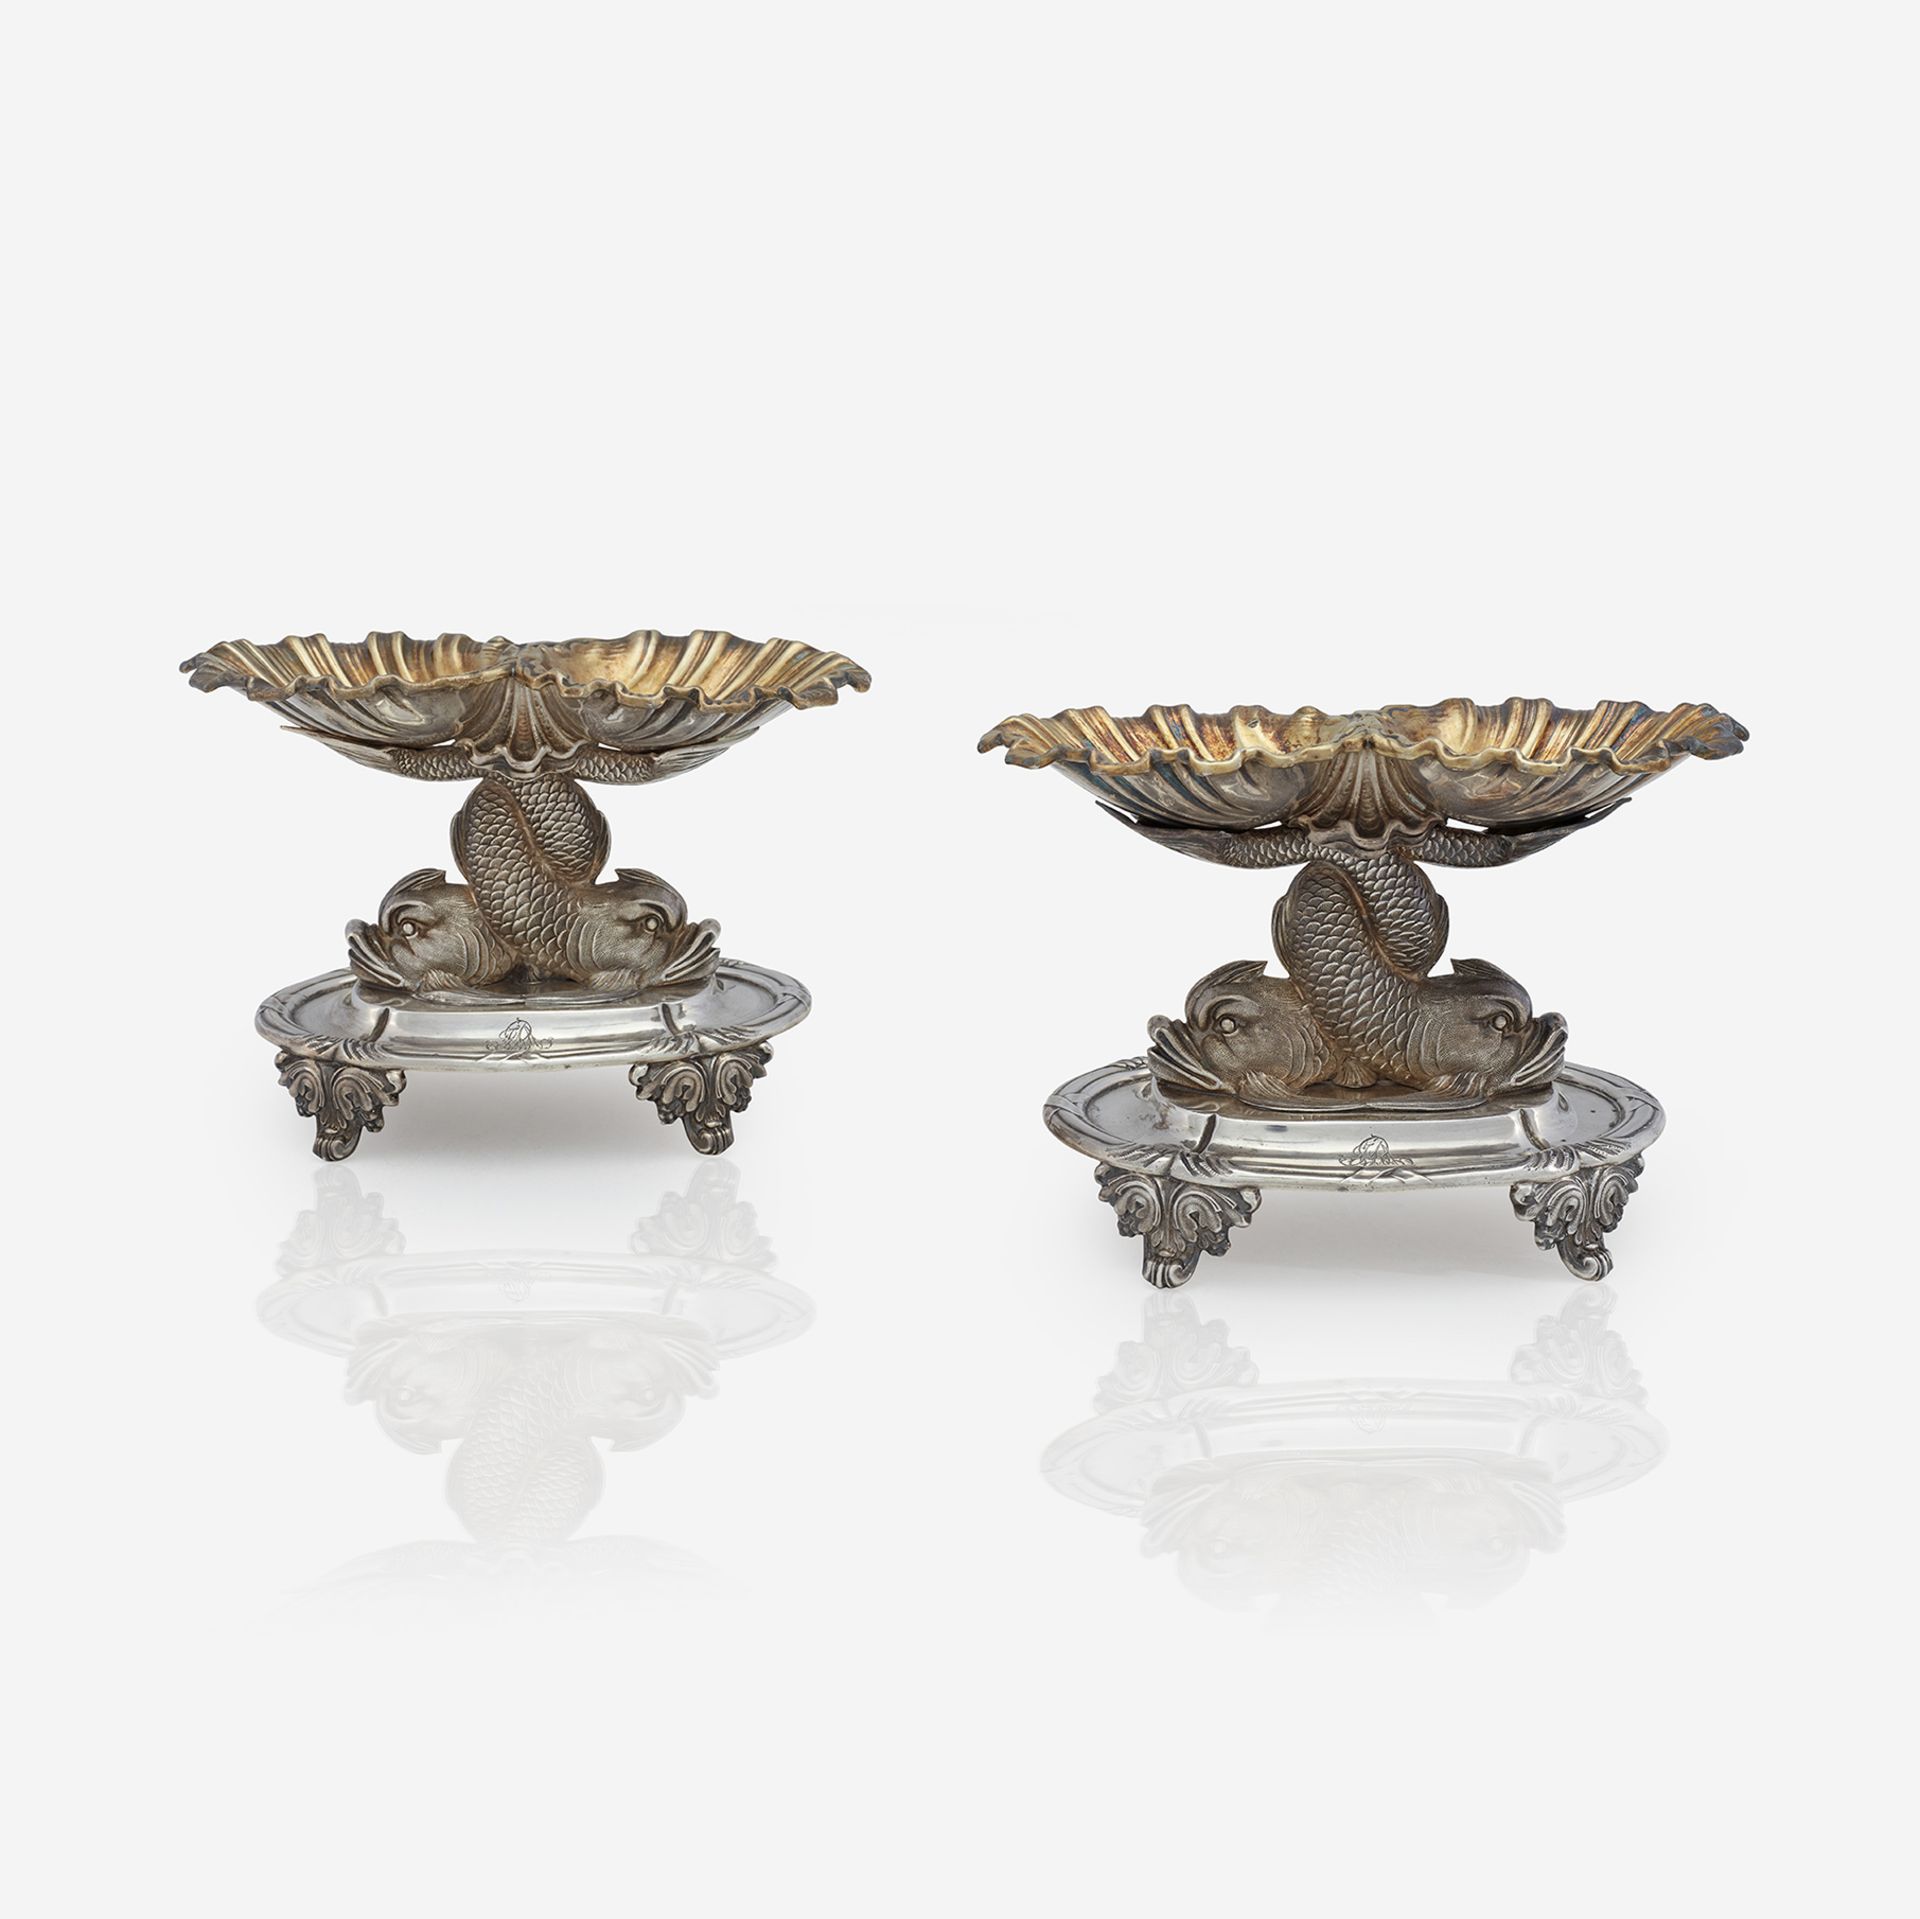 A pair of French silver and vermeil double salts, Maison Odiot, mid 19th century